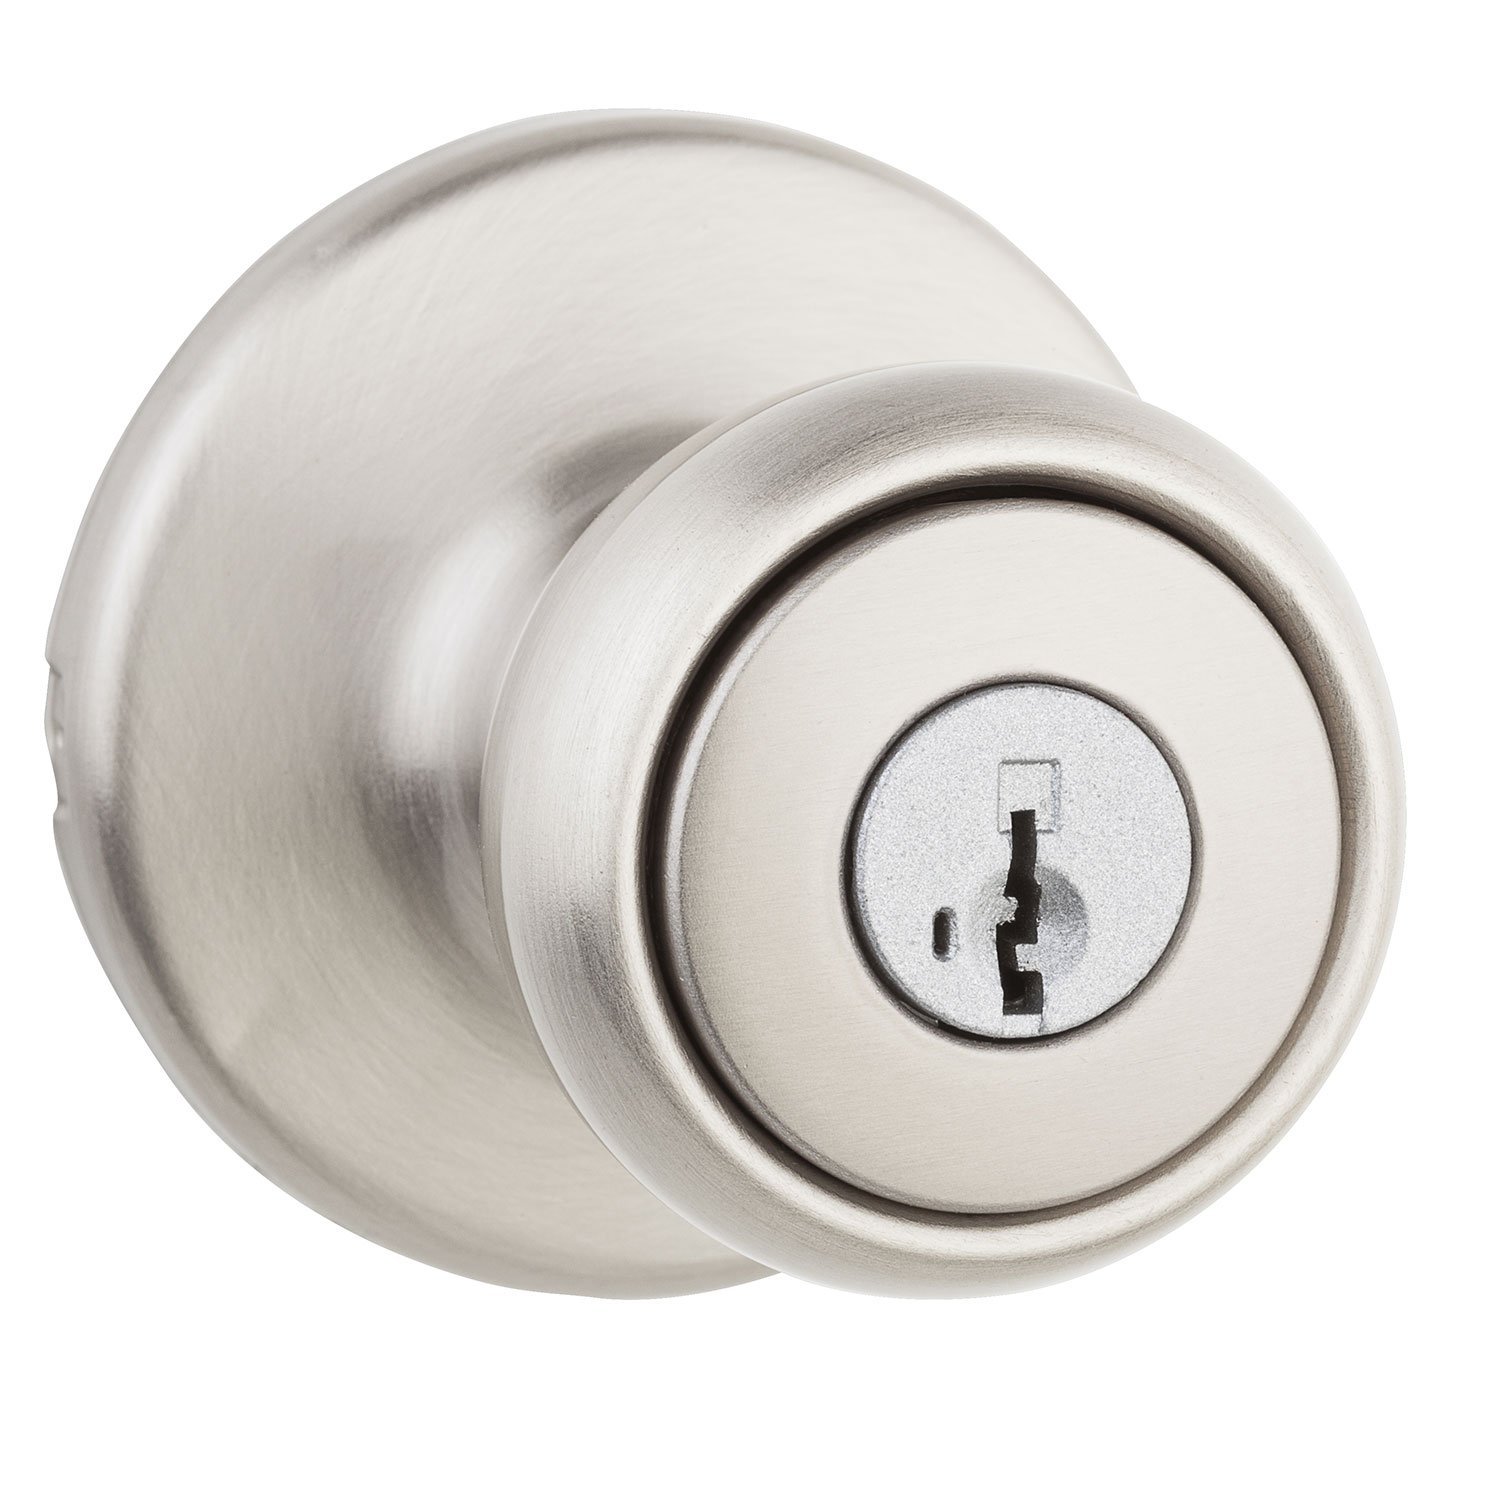 Book Cover Kwikset 94002-761 Tylo Keyed Entry Knob Featuring SmartKey in Satin Nickel